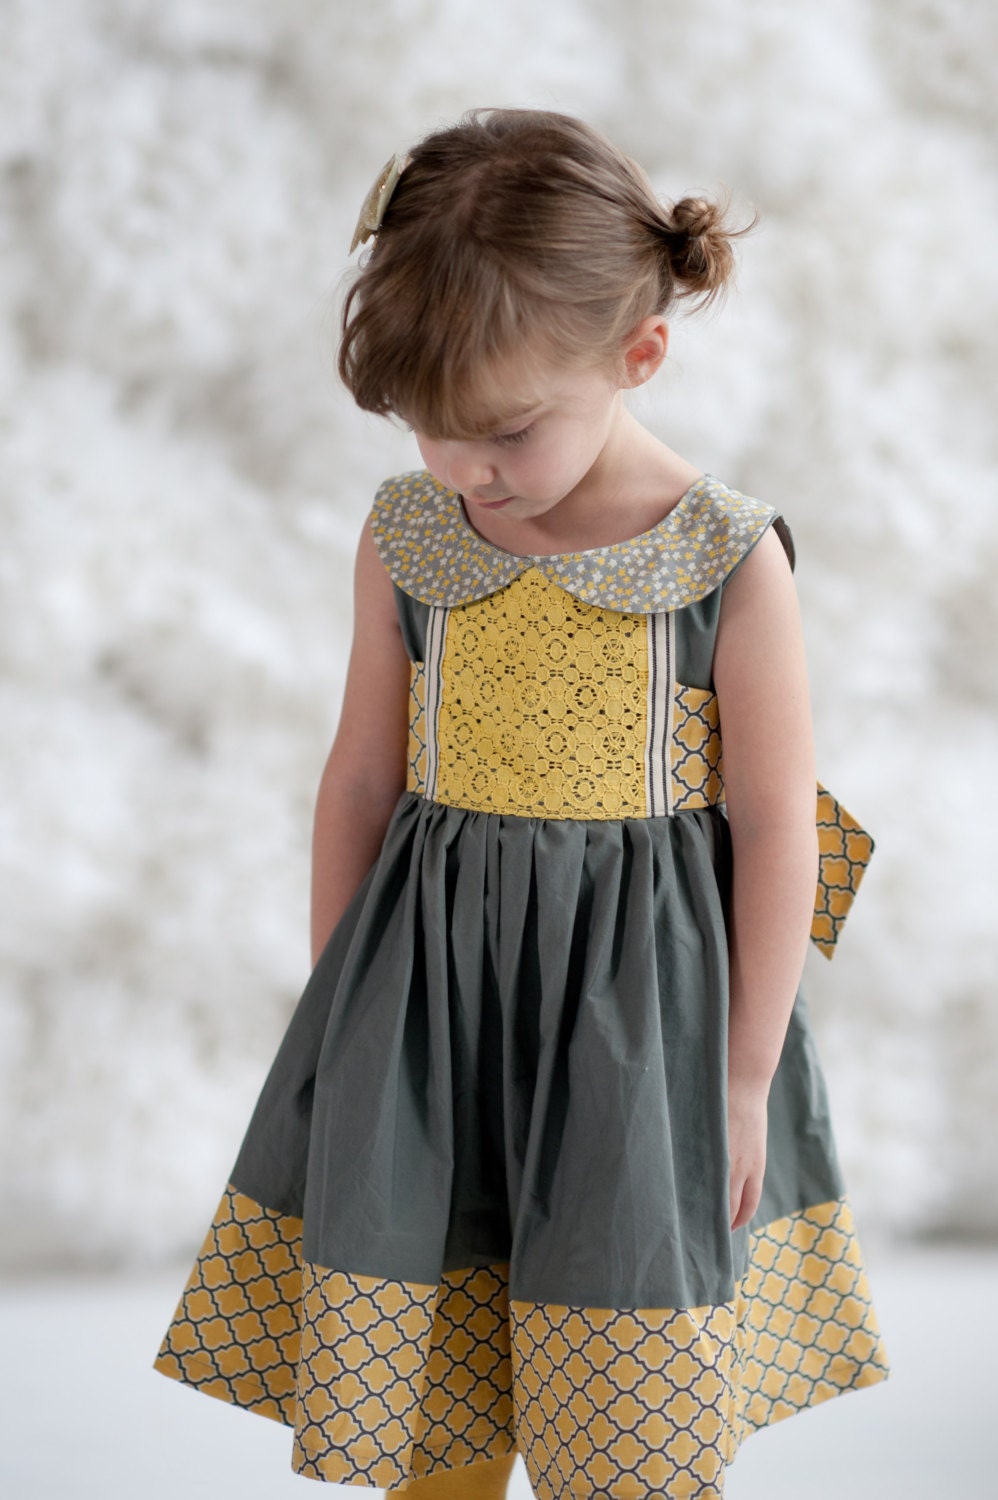 Limited Edition Girls Grey and Yellow Peter Pan Collar Party Dress- Mary Sunshine Sizes 12/18 through 14 - lillipopsdesigns